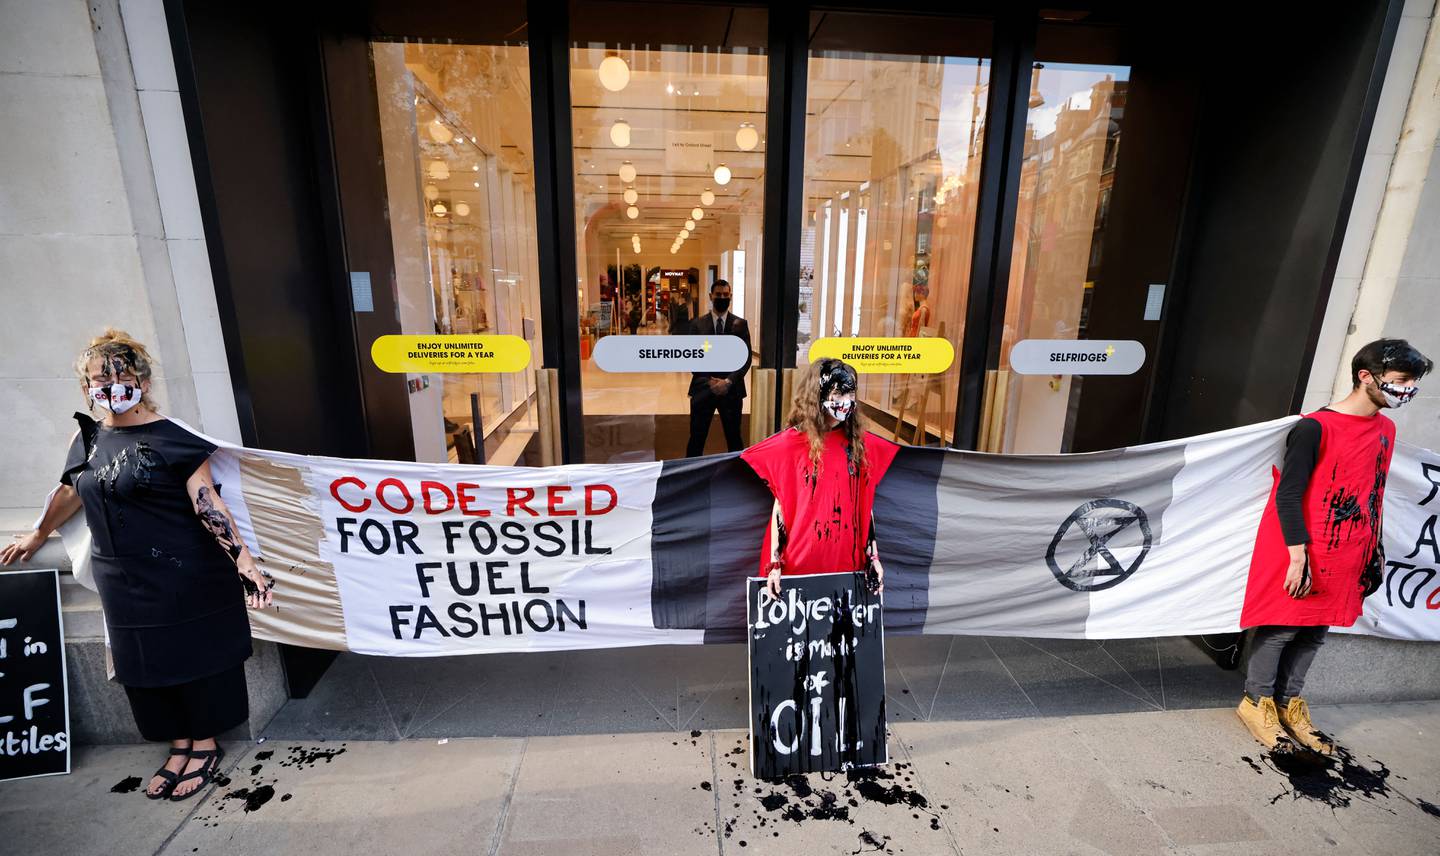 Activists from the Extinction Rebellion demonstrate outside Selfridges store in central London on August 24, 2021 during the group's 'Impossible Rebellion' series of actions.